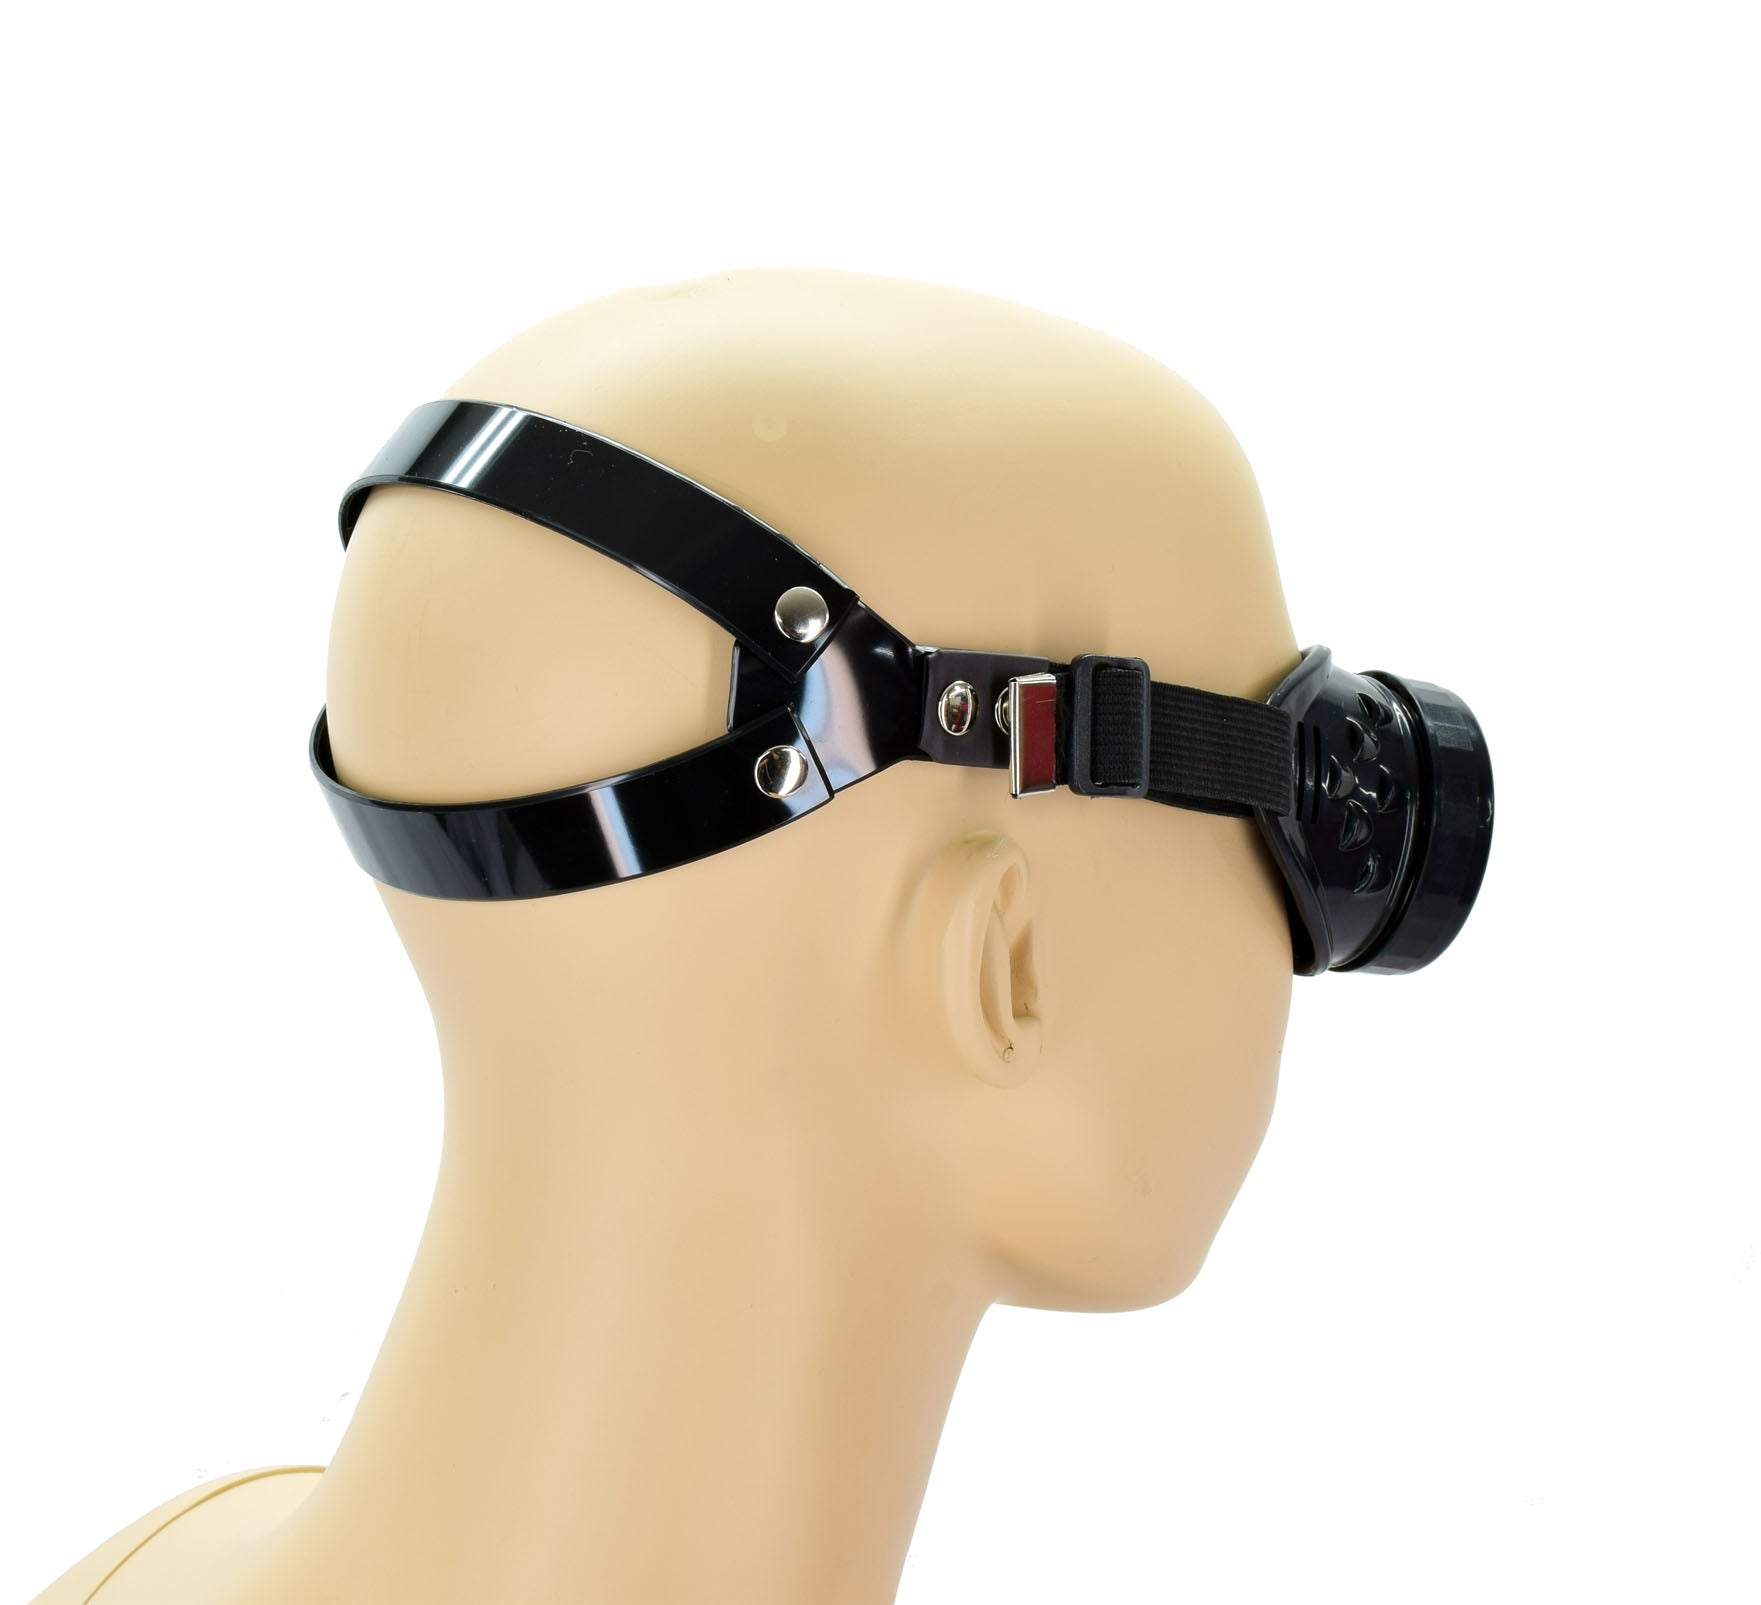 The right side and rear view of the Blind Goggles on a mannequin head.